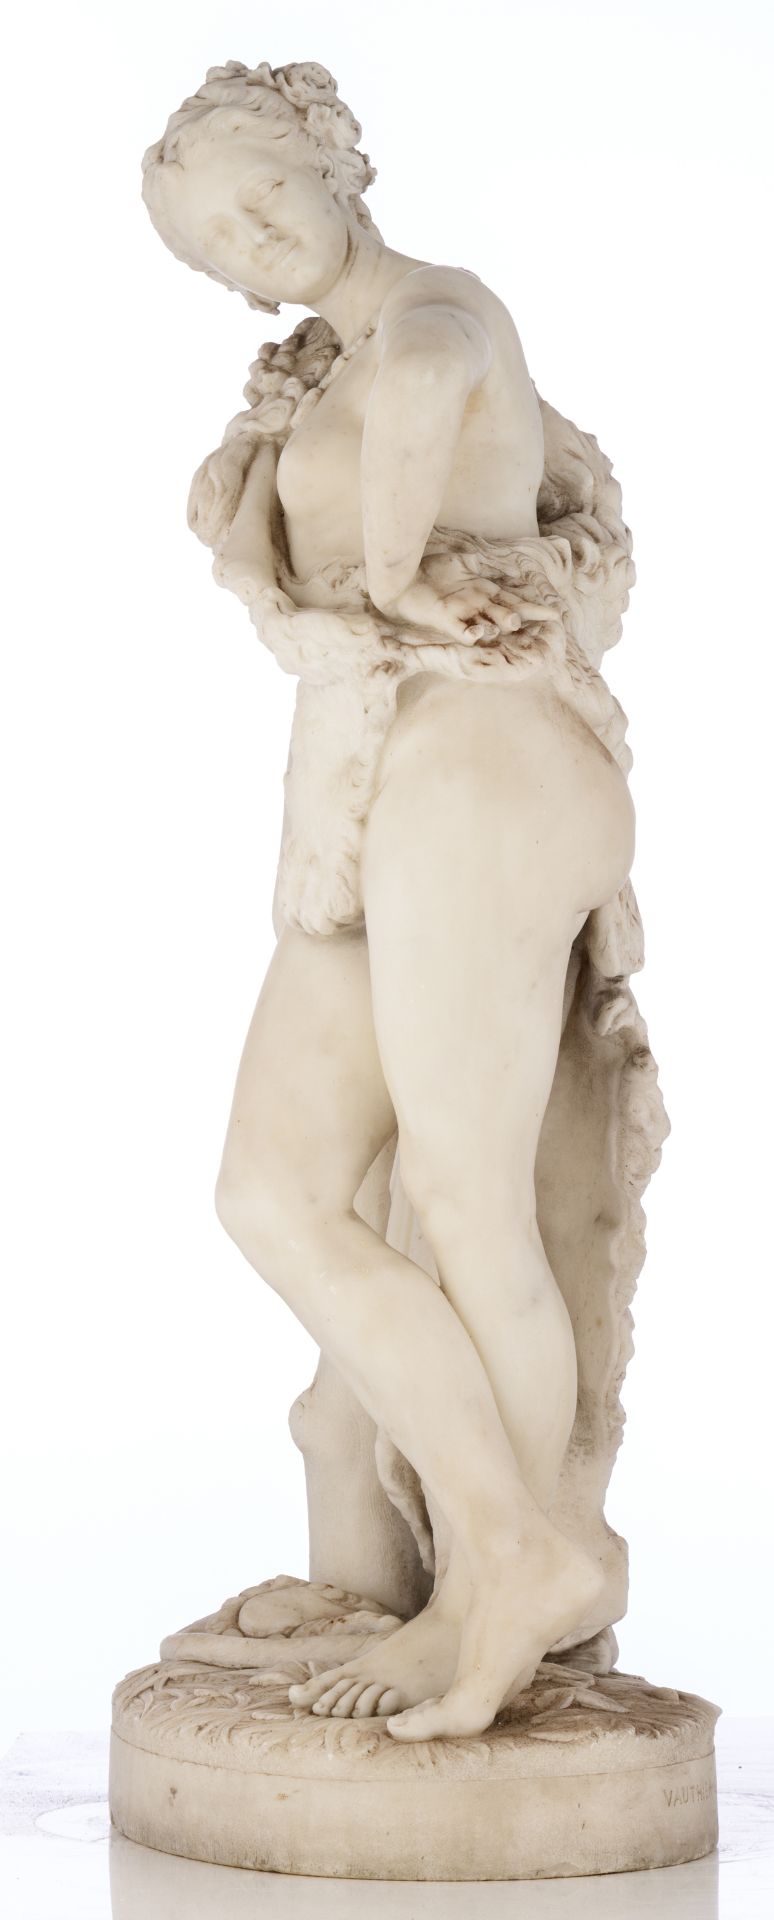 Vauthier-Galle A., Deianeira, dated 1858, Carrara marble, H 92 cm - Image 2 of 6